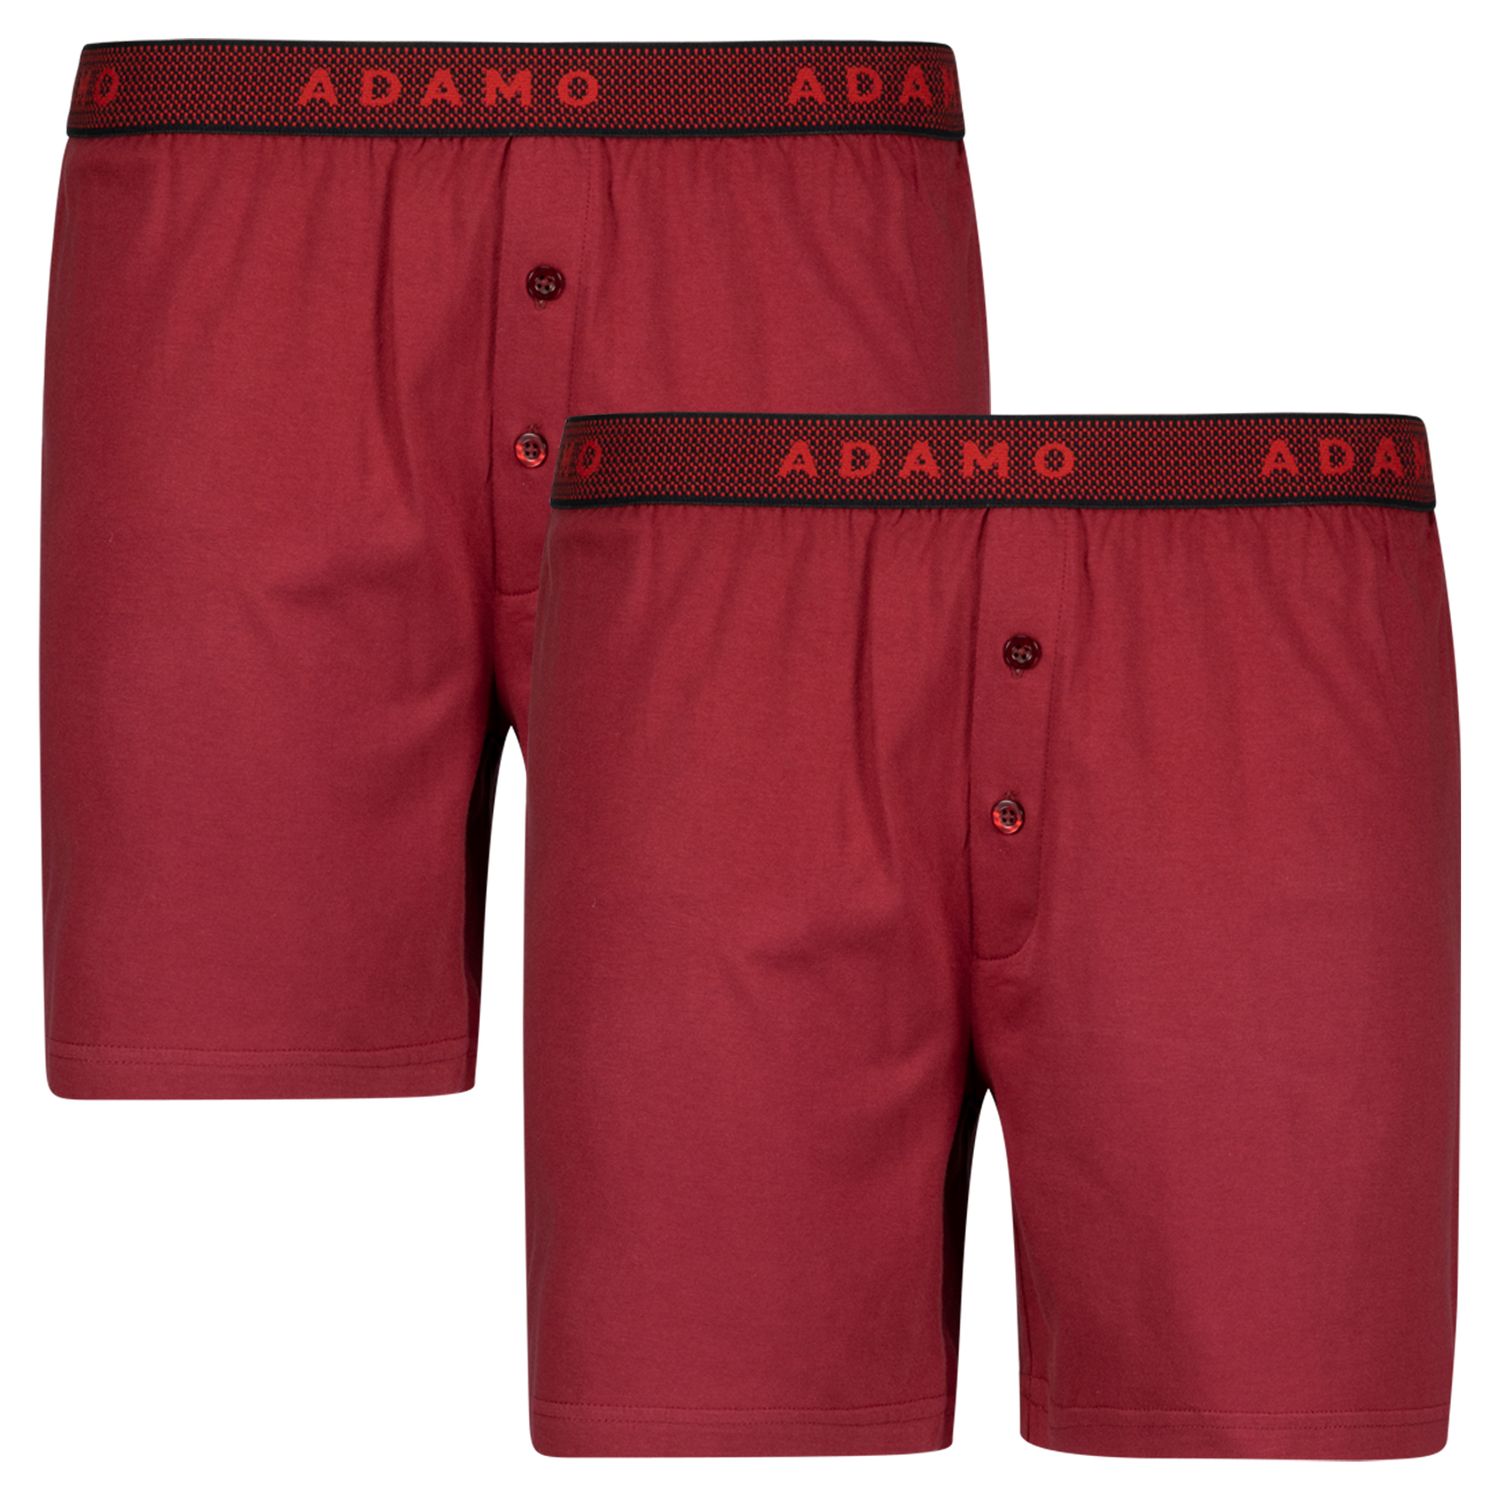 Burgundy boxershorts by ADAMO series "Jonas" in oversizes up to 20 // double pack